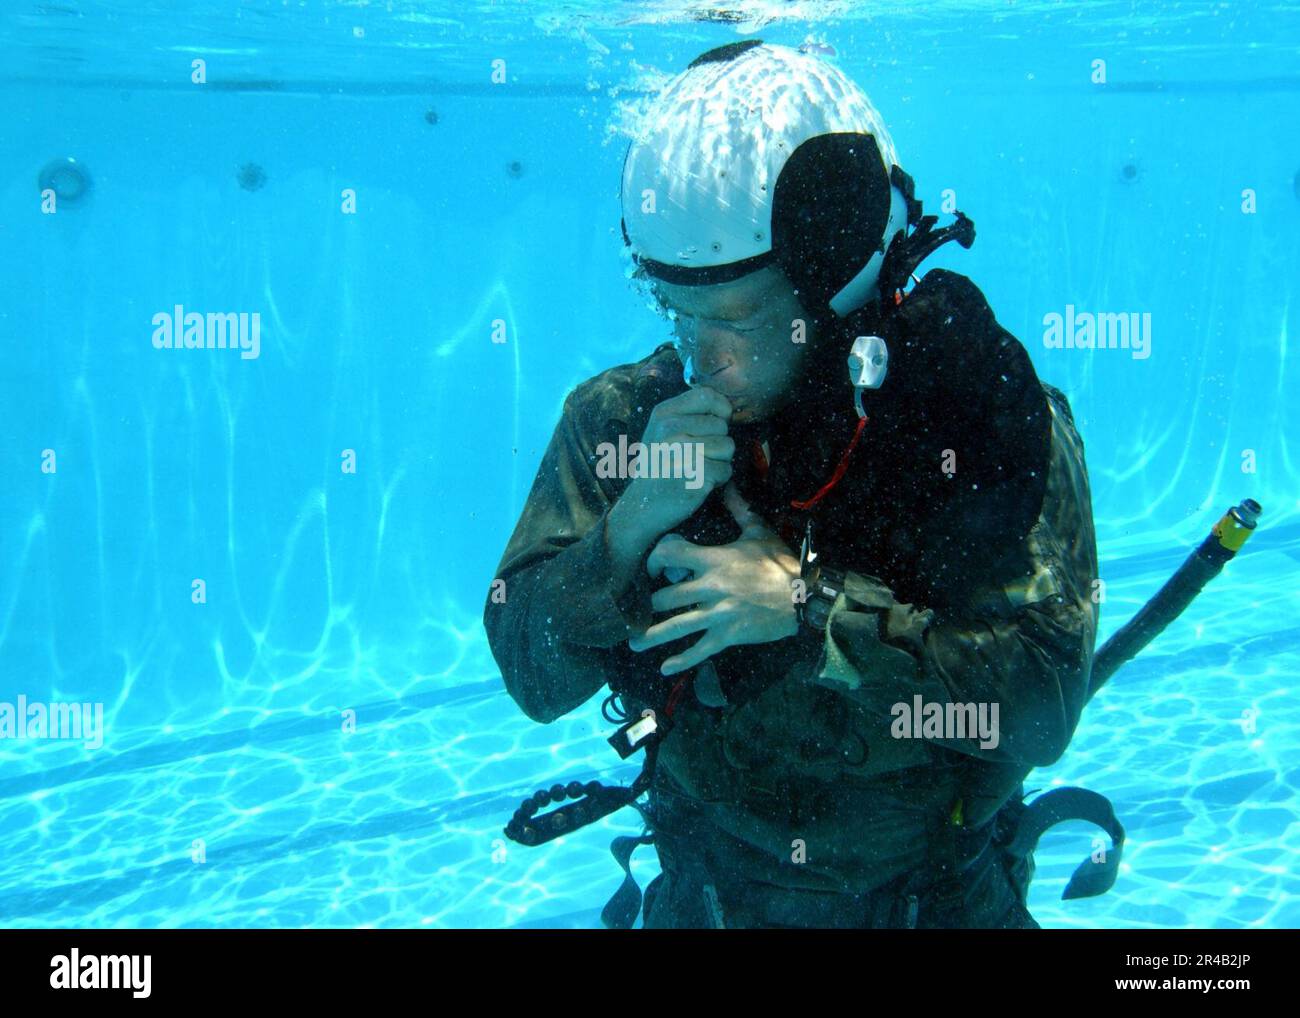 US Navy  A student attending the refresher course in water survival at Aviation Survival Training Center, Marine Corps Air Station Miramar, orally inflates his survival vest. Stock Photo